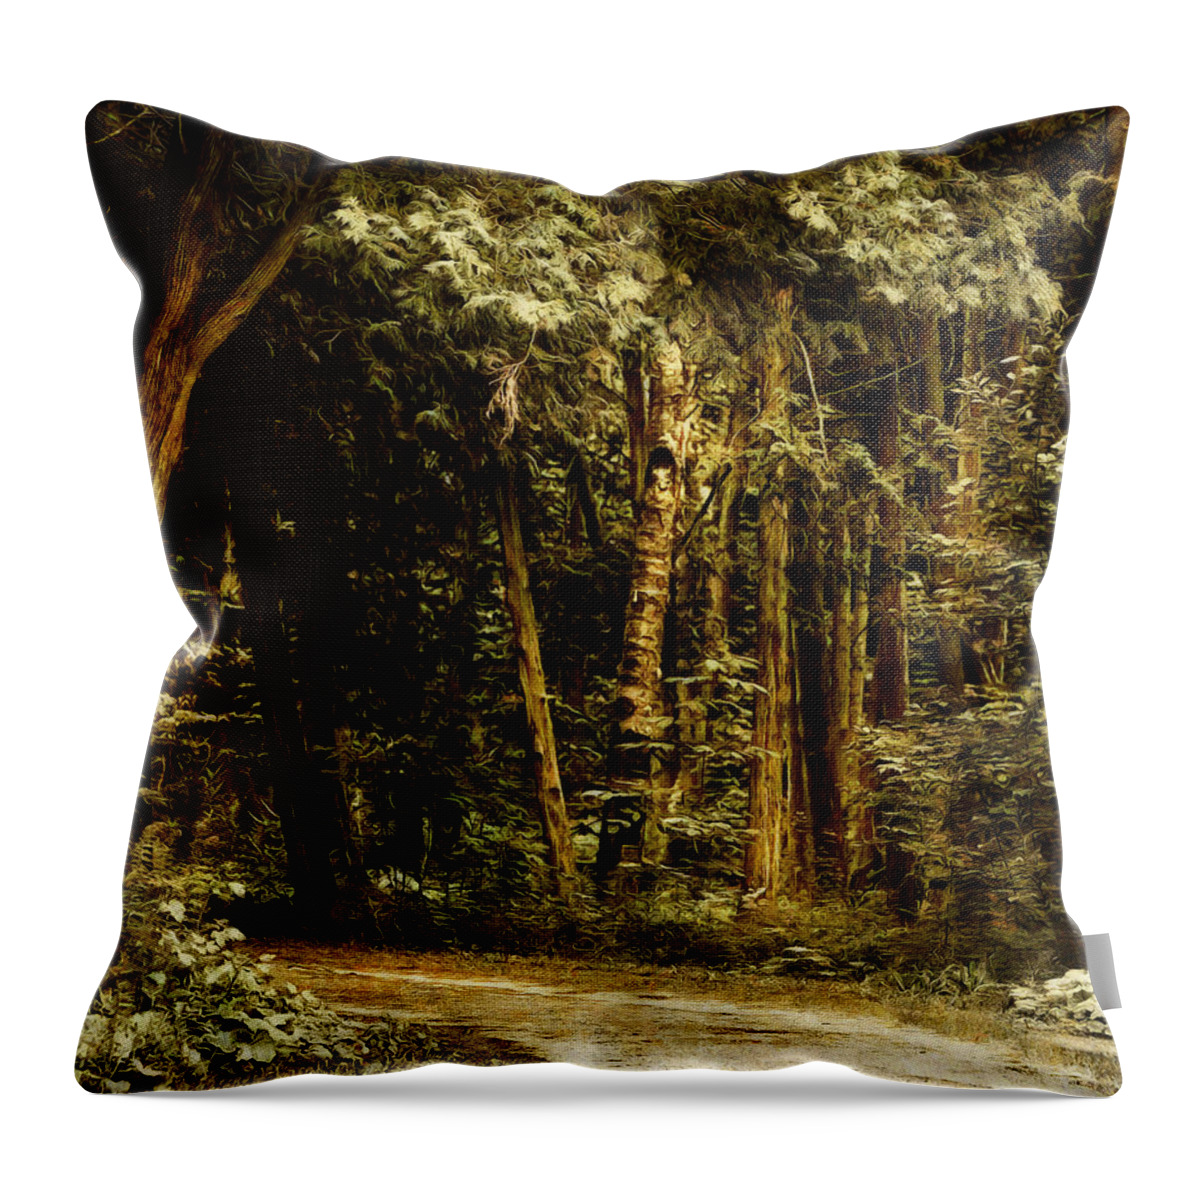 Forest Throw Pillow featuring the digital art Forest Curve by JGracey Stinson